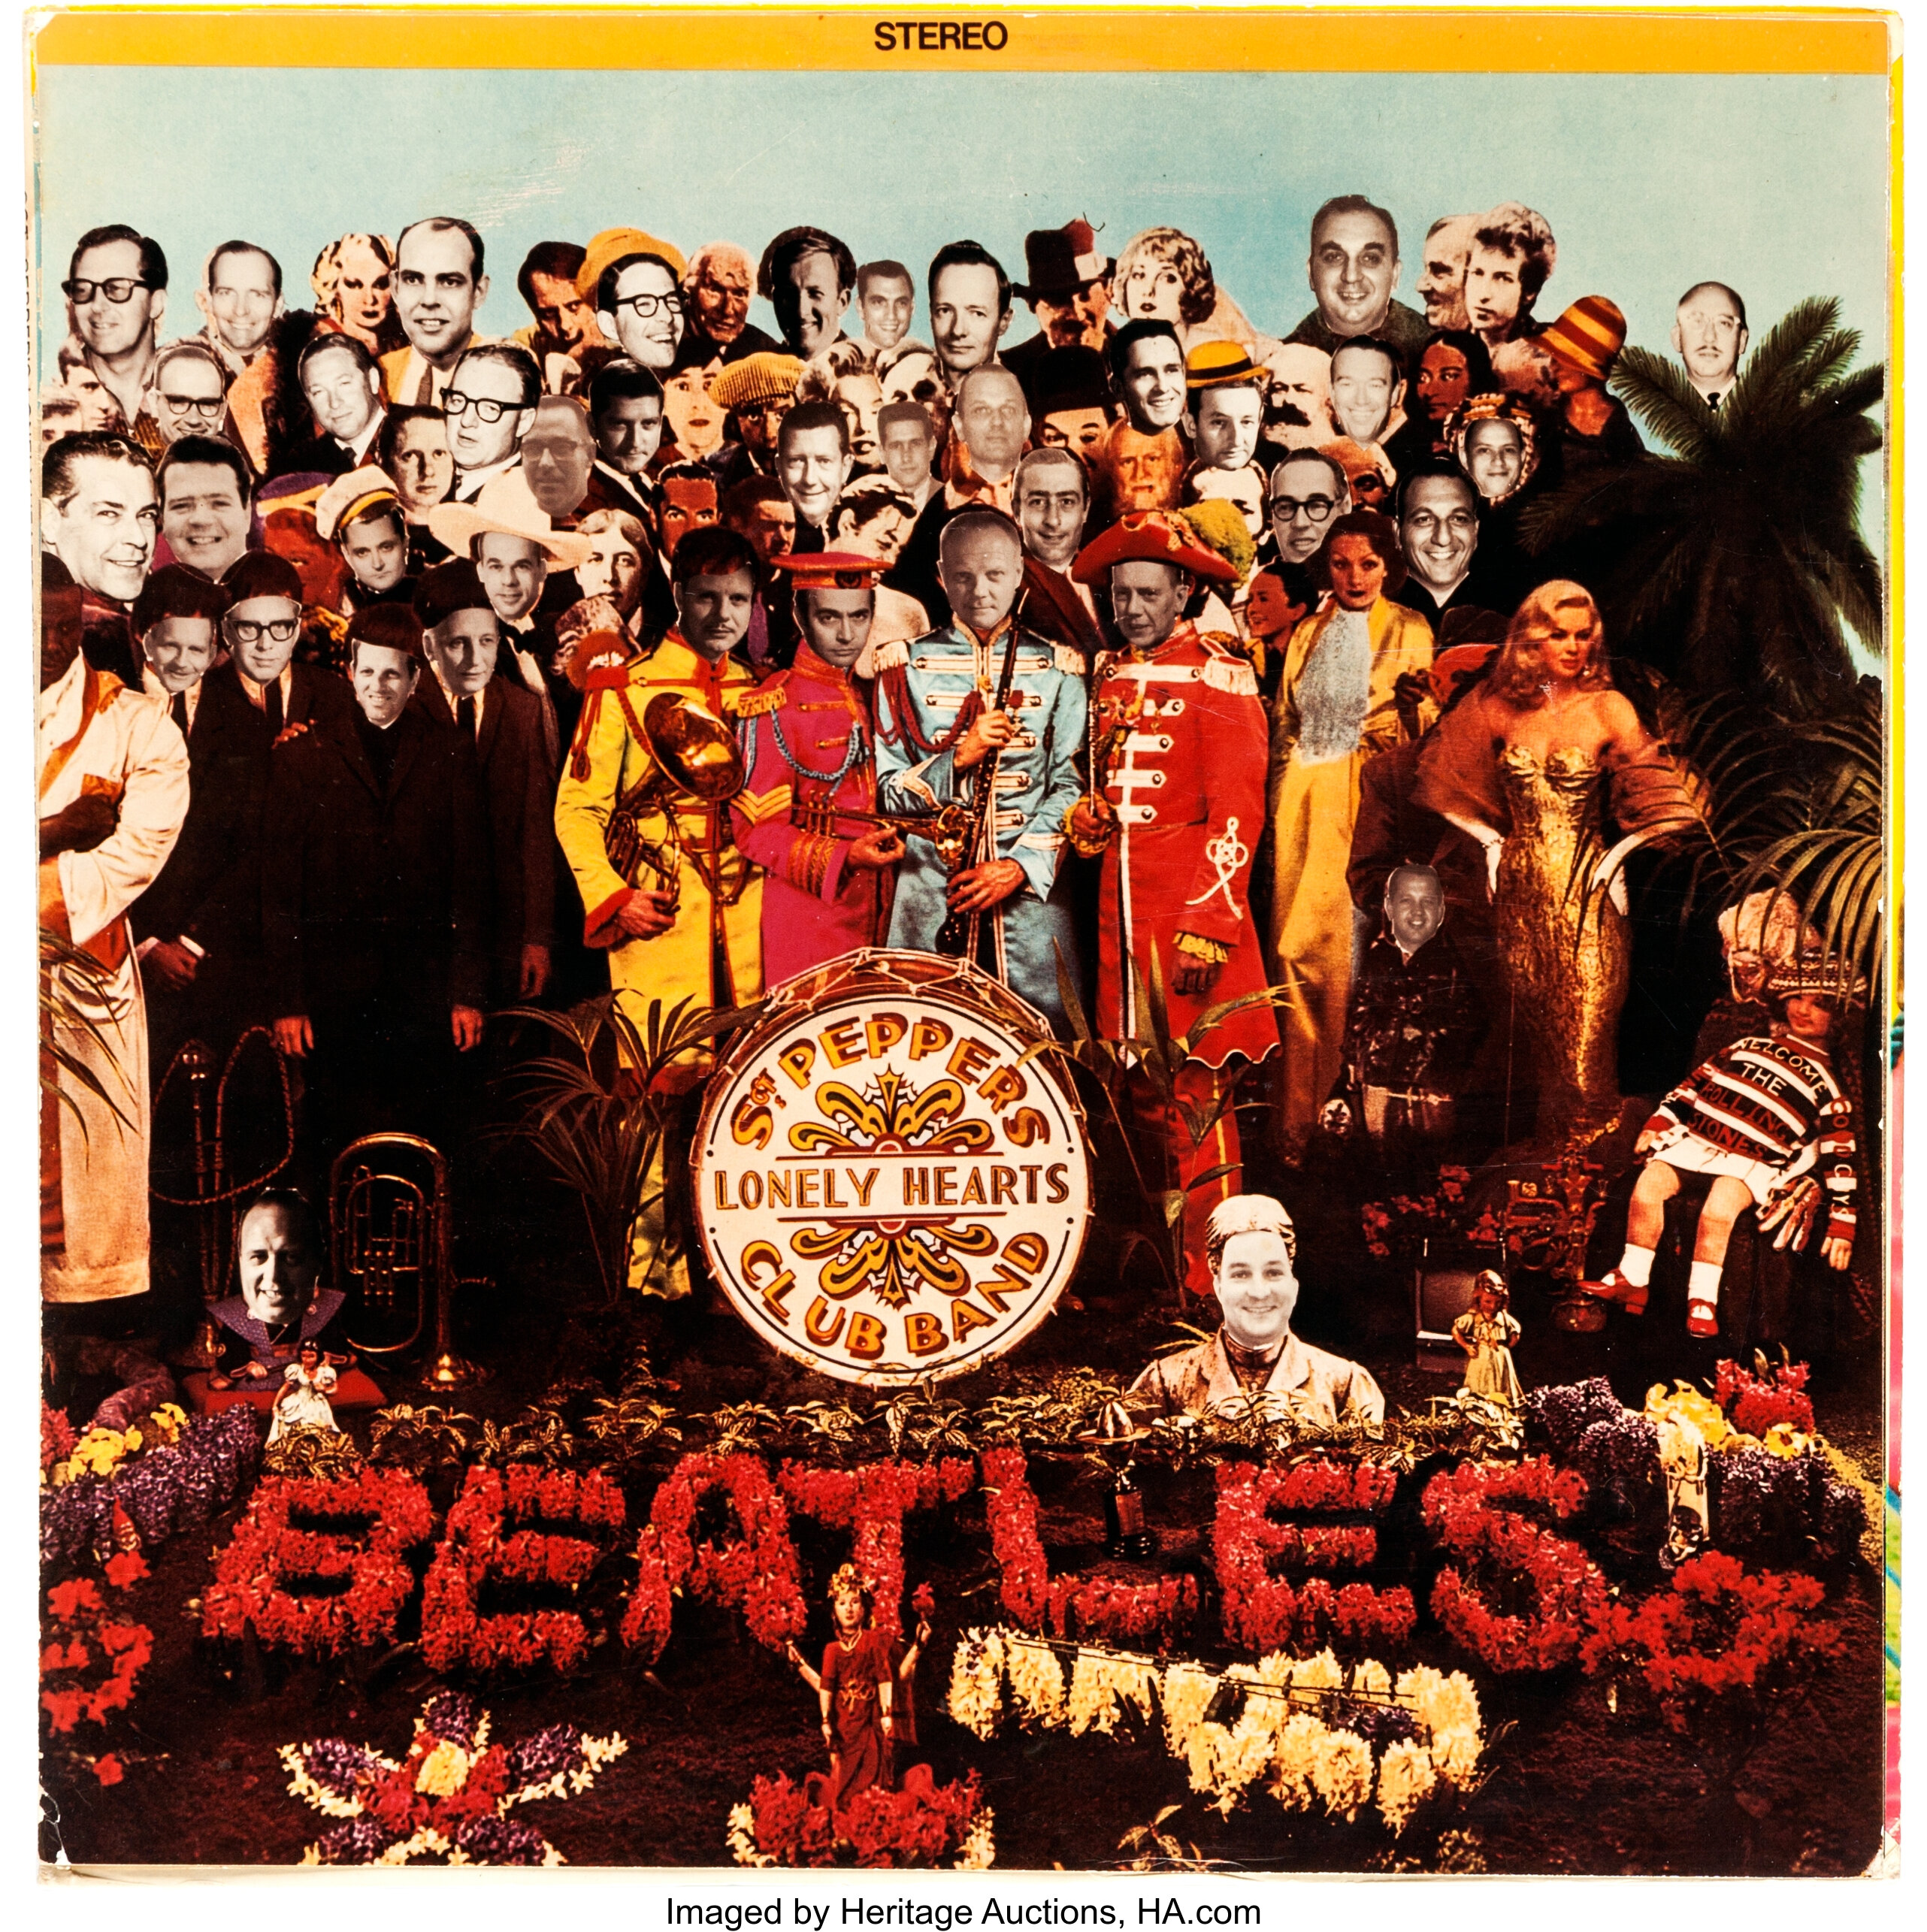 Whos Who On The Beatles Sgt Peppers Lonely Hearts Album Cover